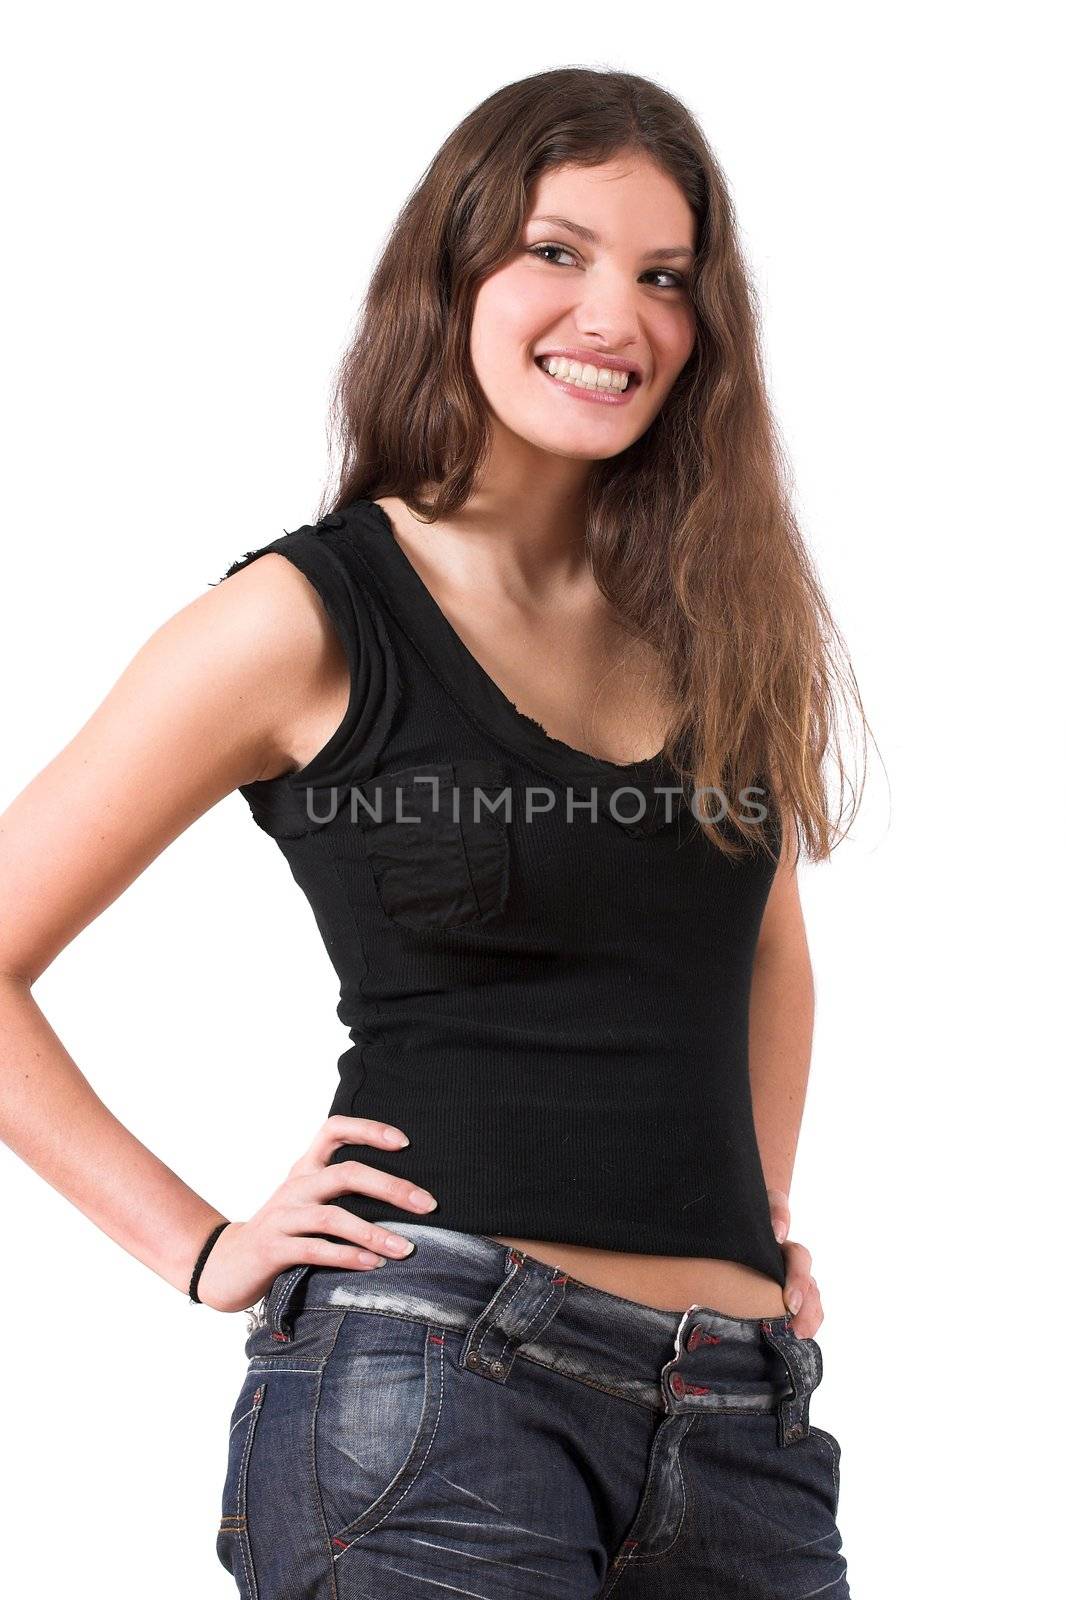 Beautiful teenager standing in a confident pose with her hands on her hip and smiling